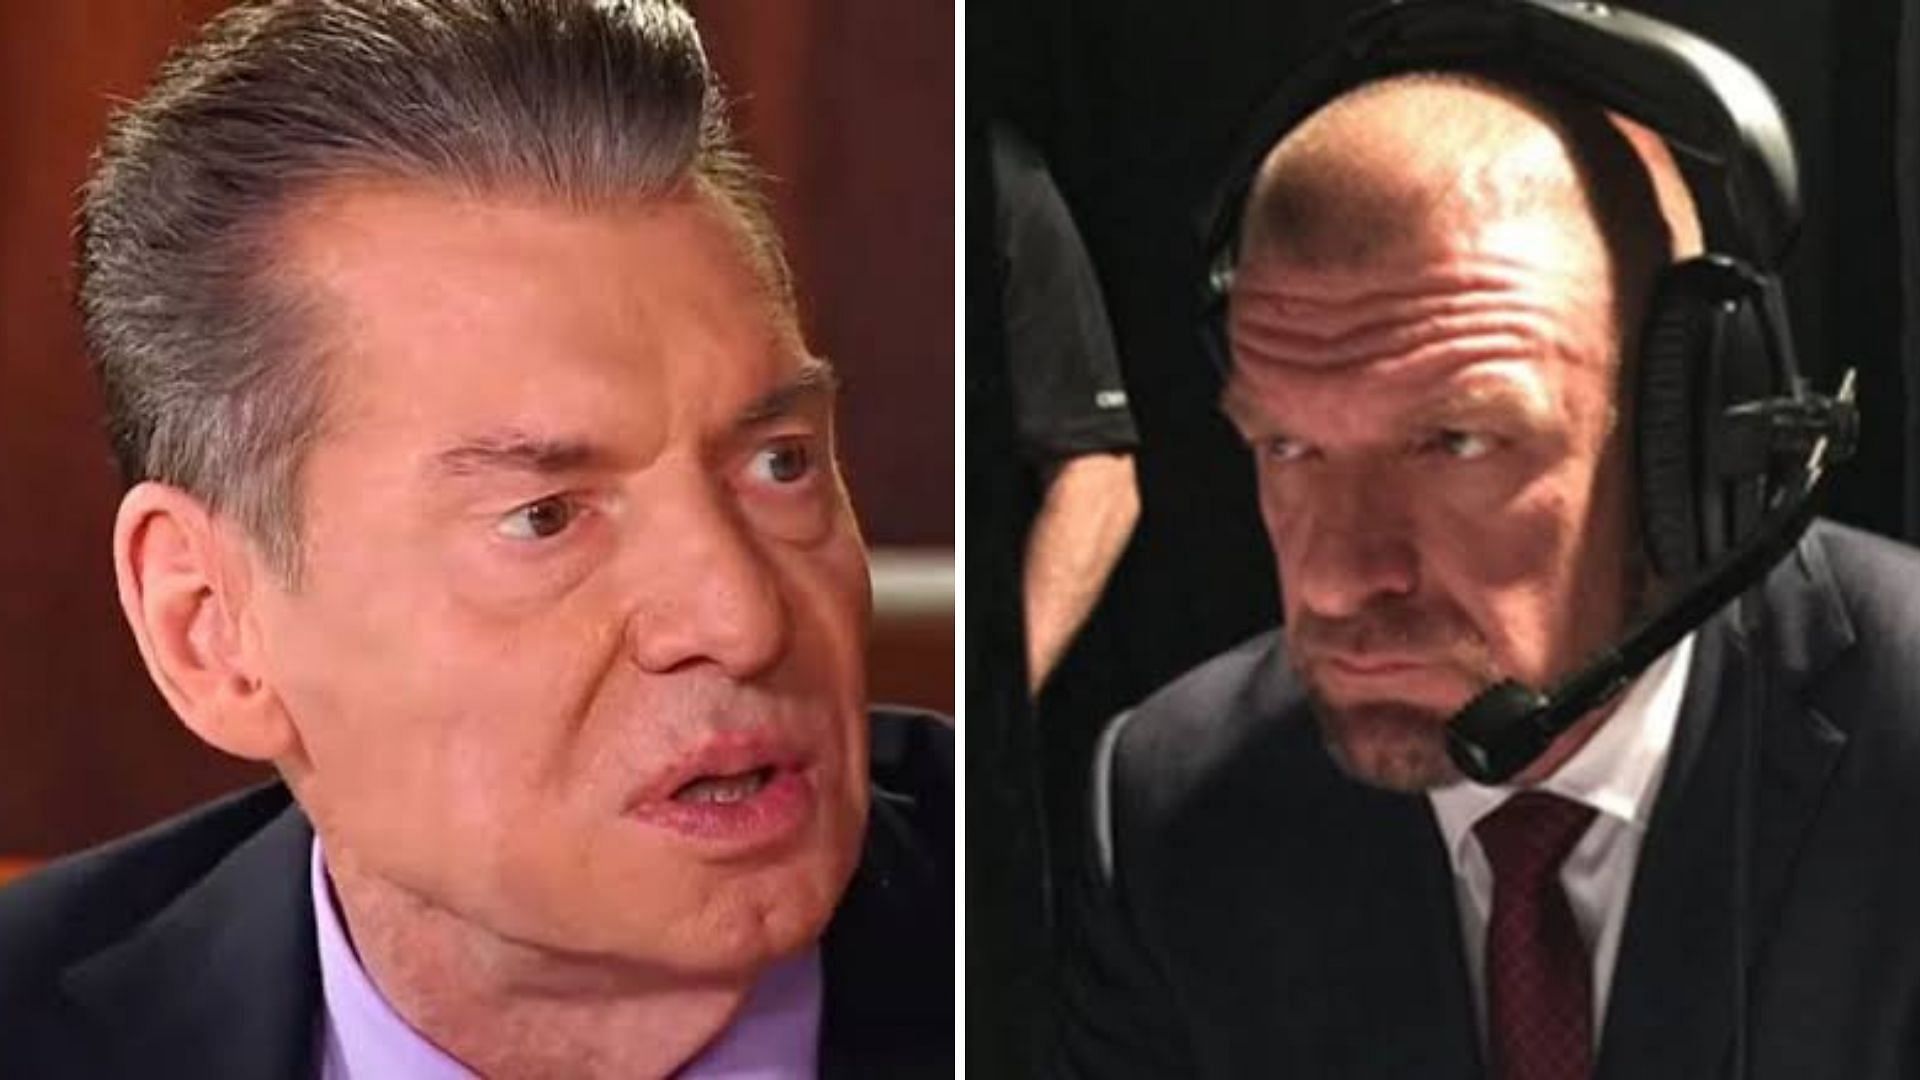 McMahon is one of wrestling